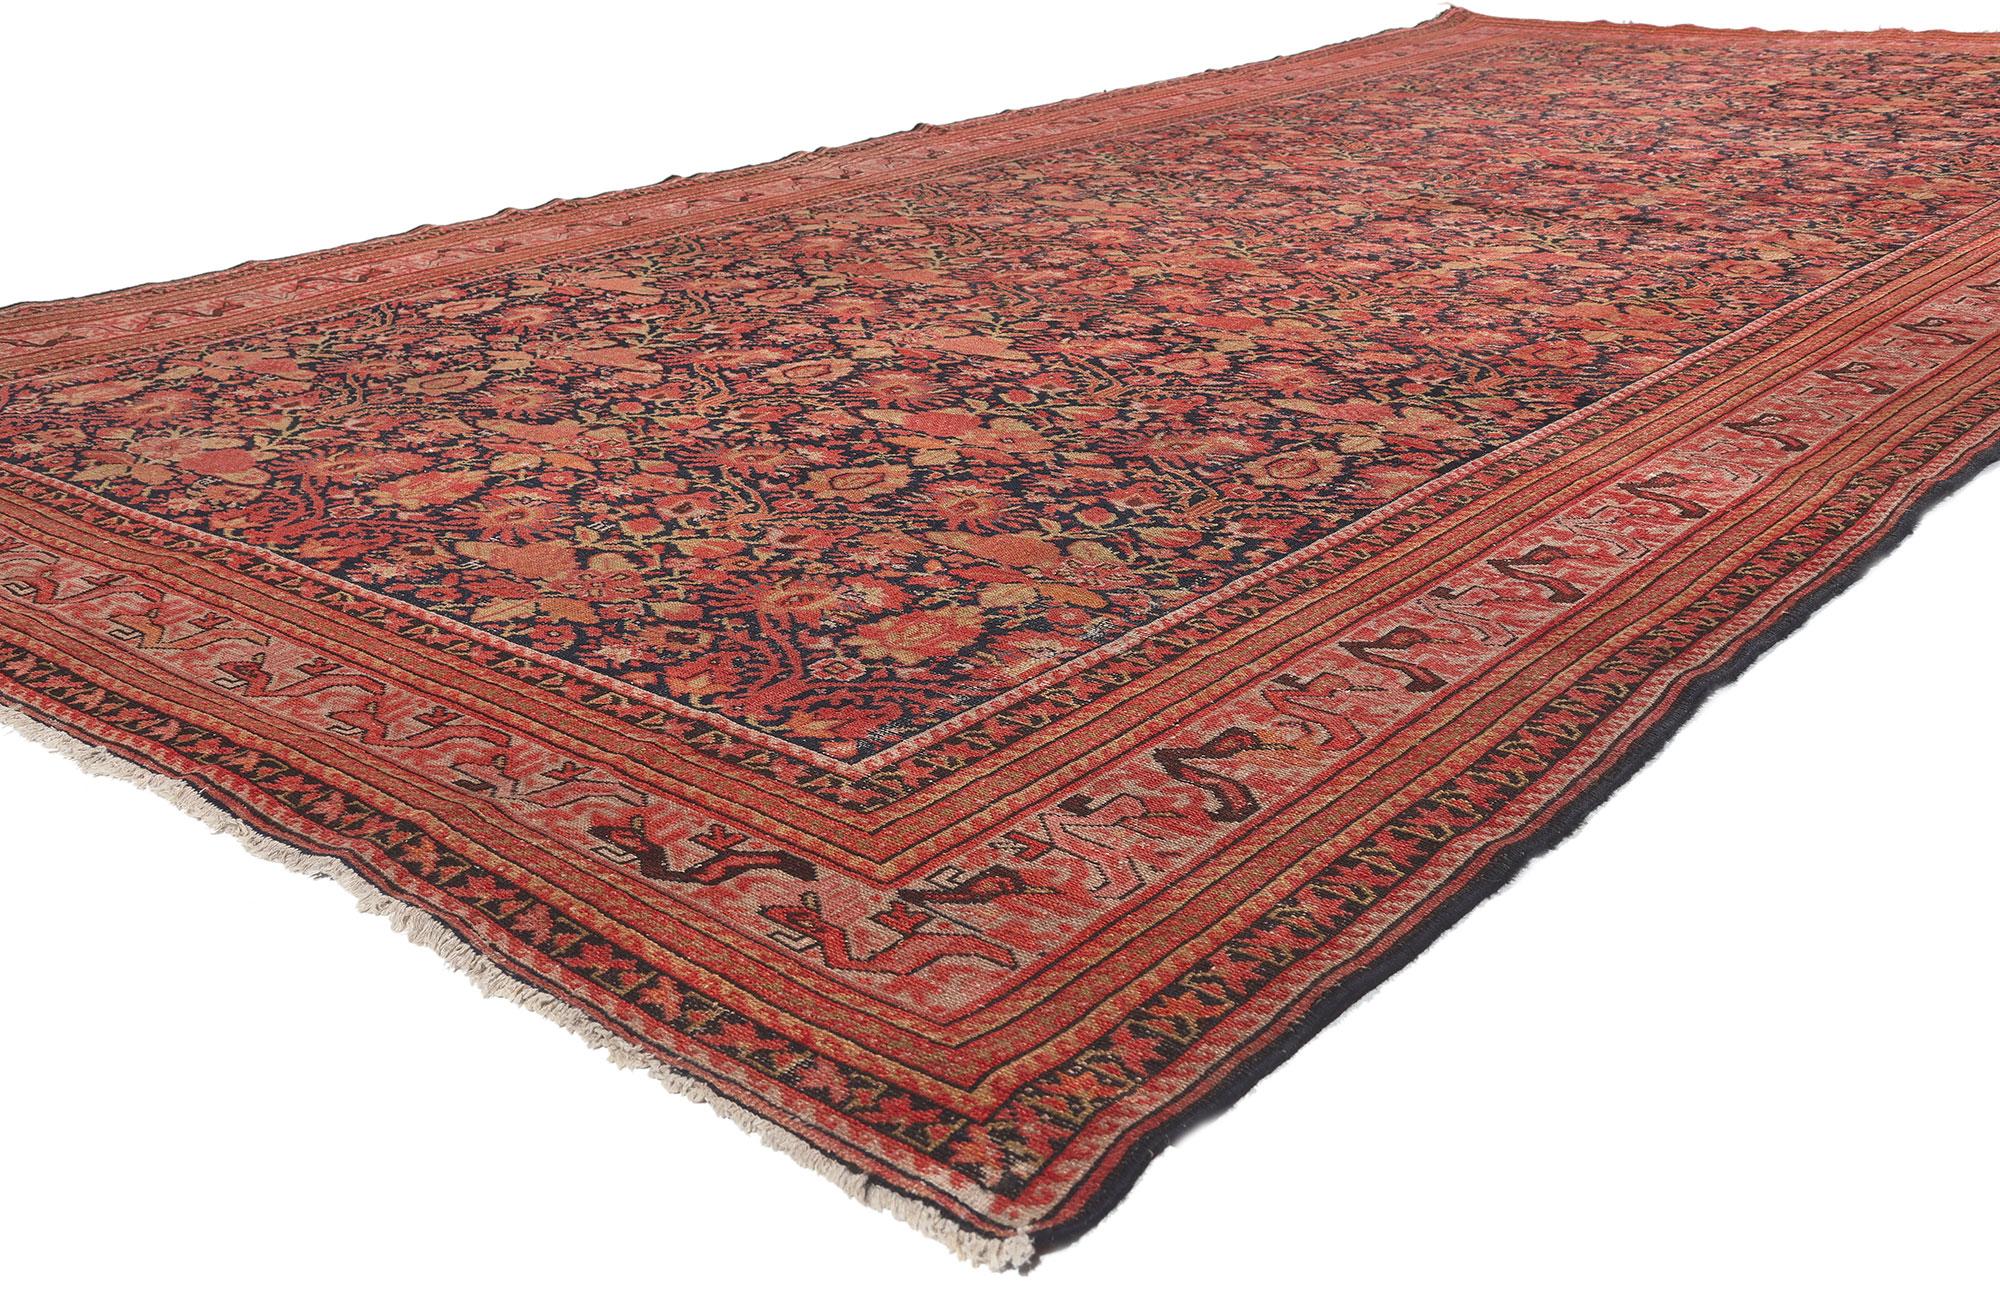 78613 Antique Persian Malayer Rug, 07'09 x 15'11. 
Rustic elegance meets timeless style in this hand knotted wool antique Persian Malayer rug. The intricate floral pattern and lively earth-tone colors woven into this piece work together creating a